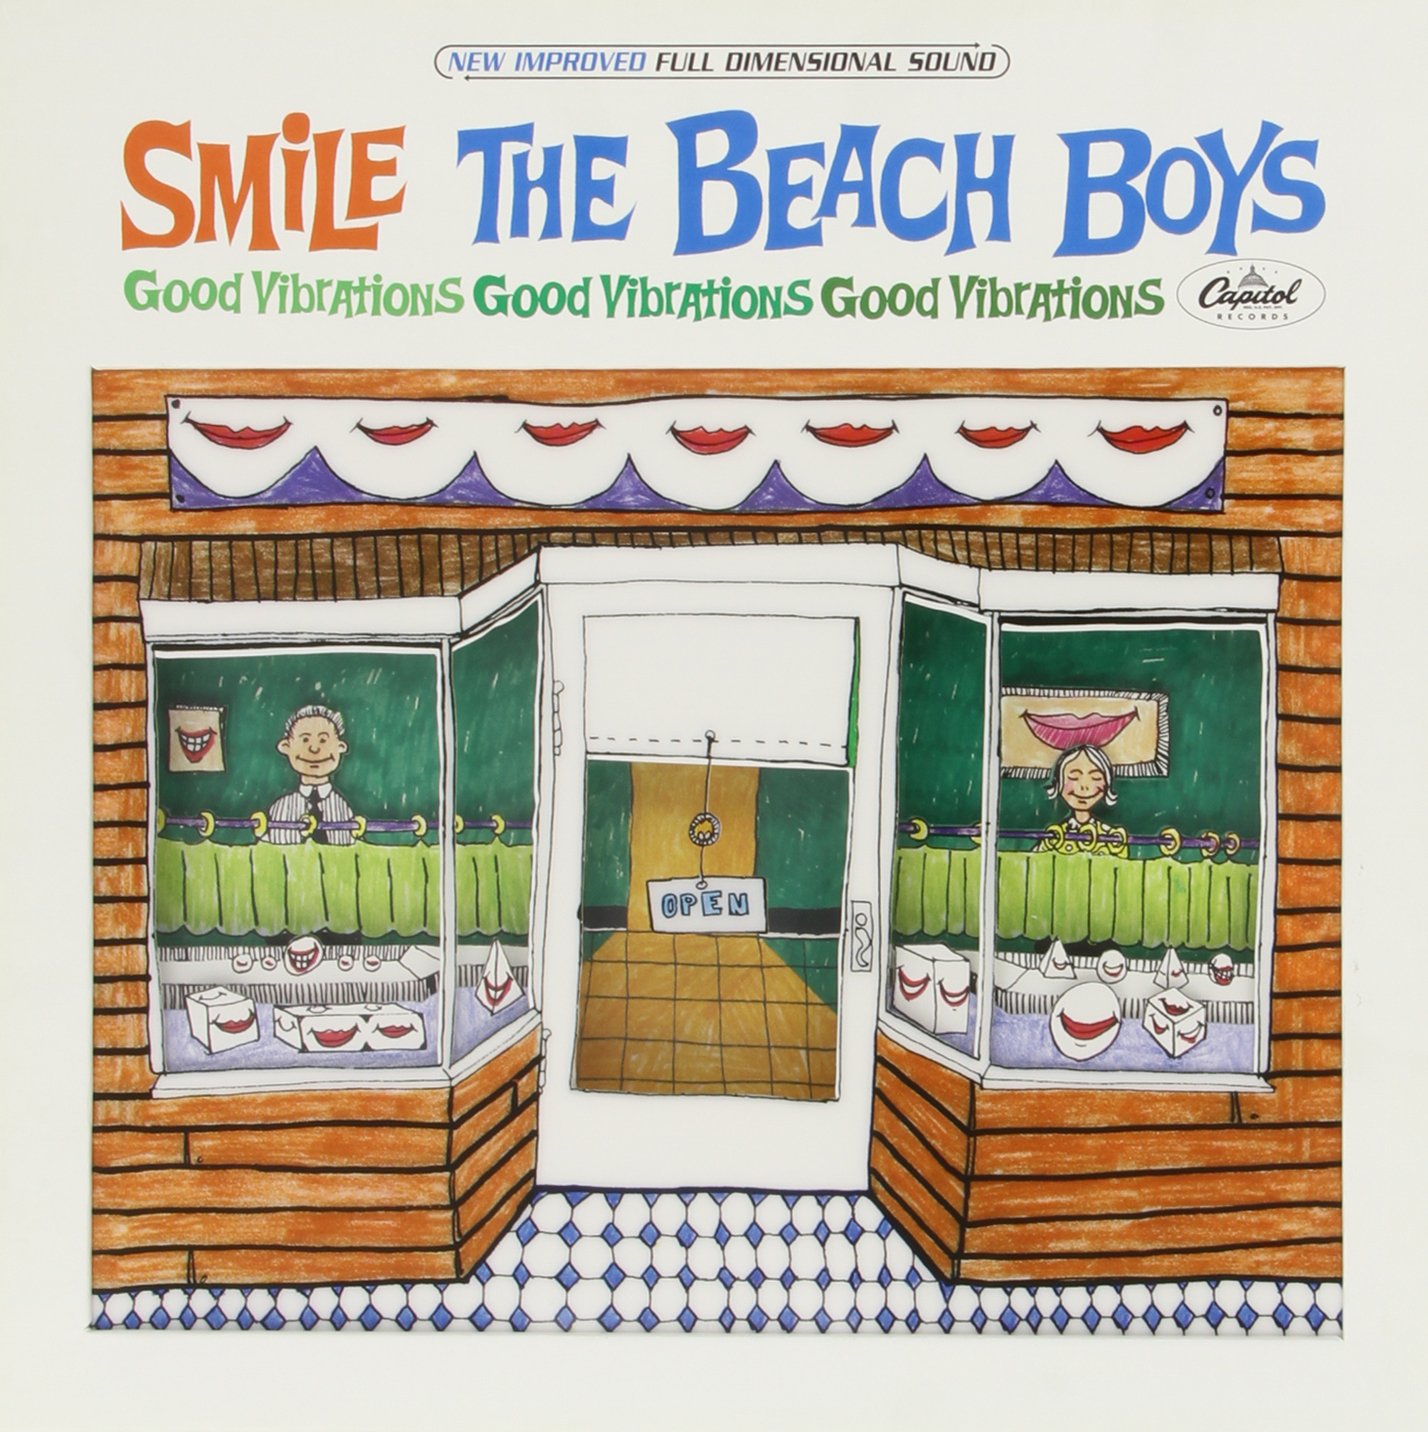 The cover for the Smile Sessions featuring the original cartoon drawing of the entrance to "The Smile Shop"